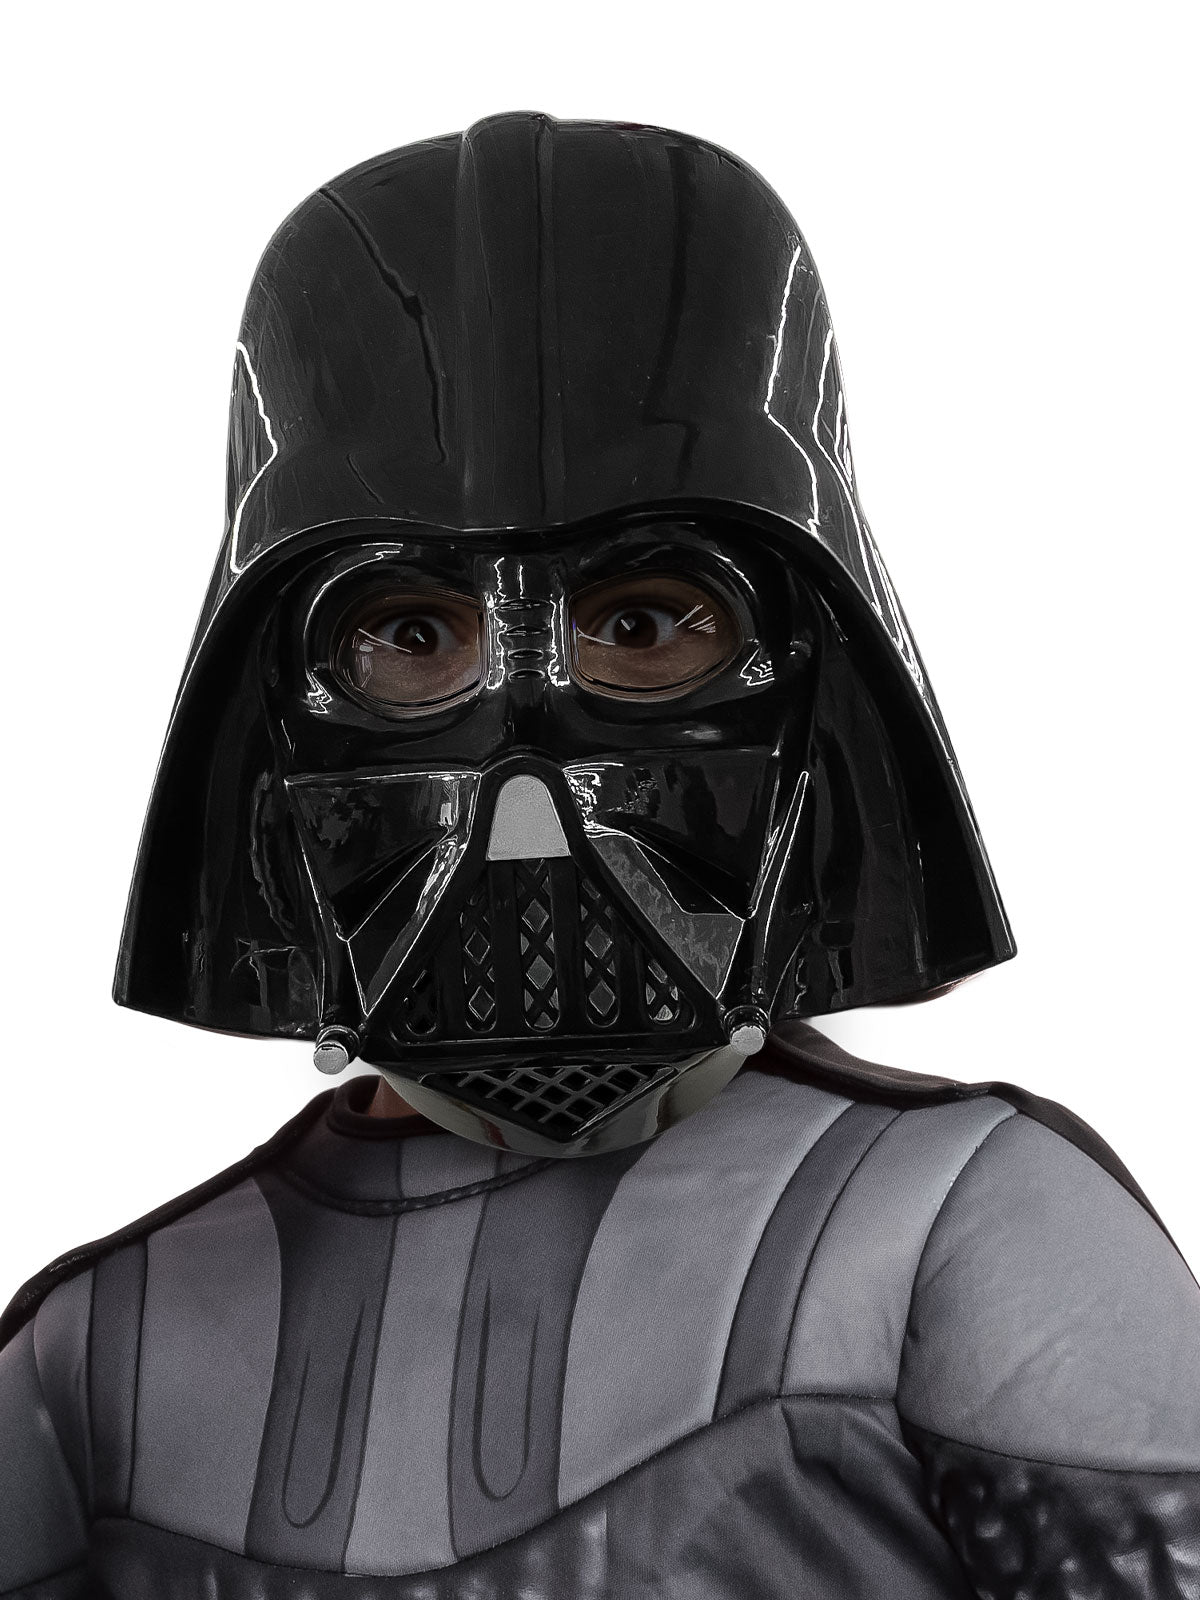 Darth Vader Costume: Perfect for Kids